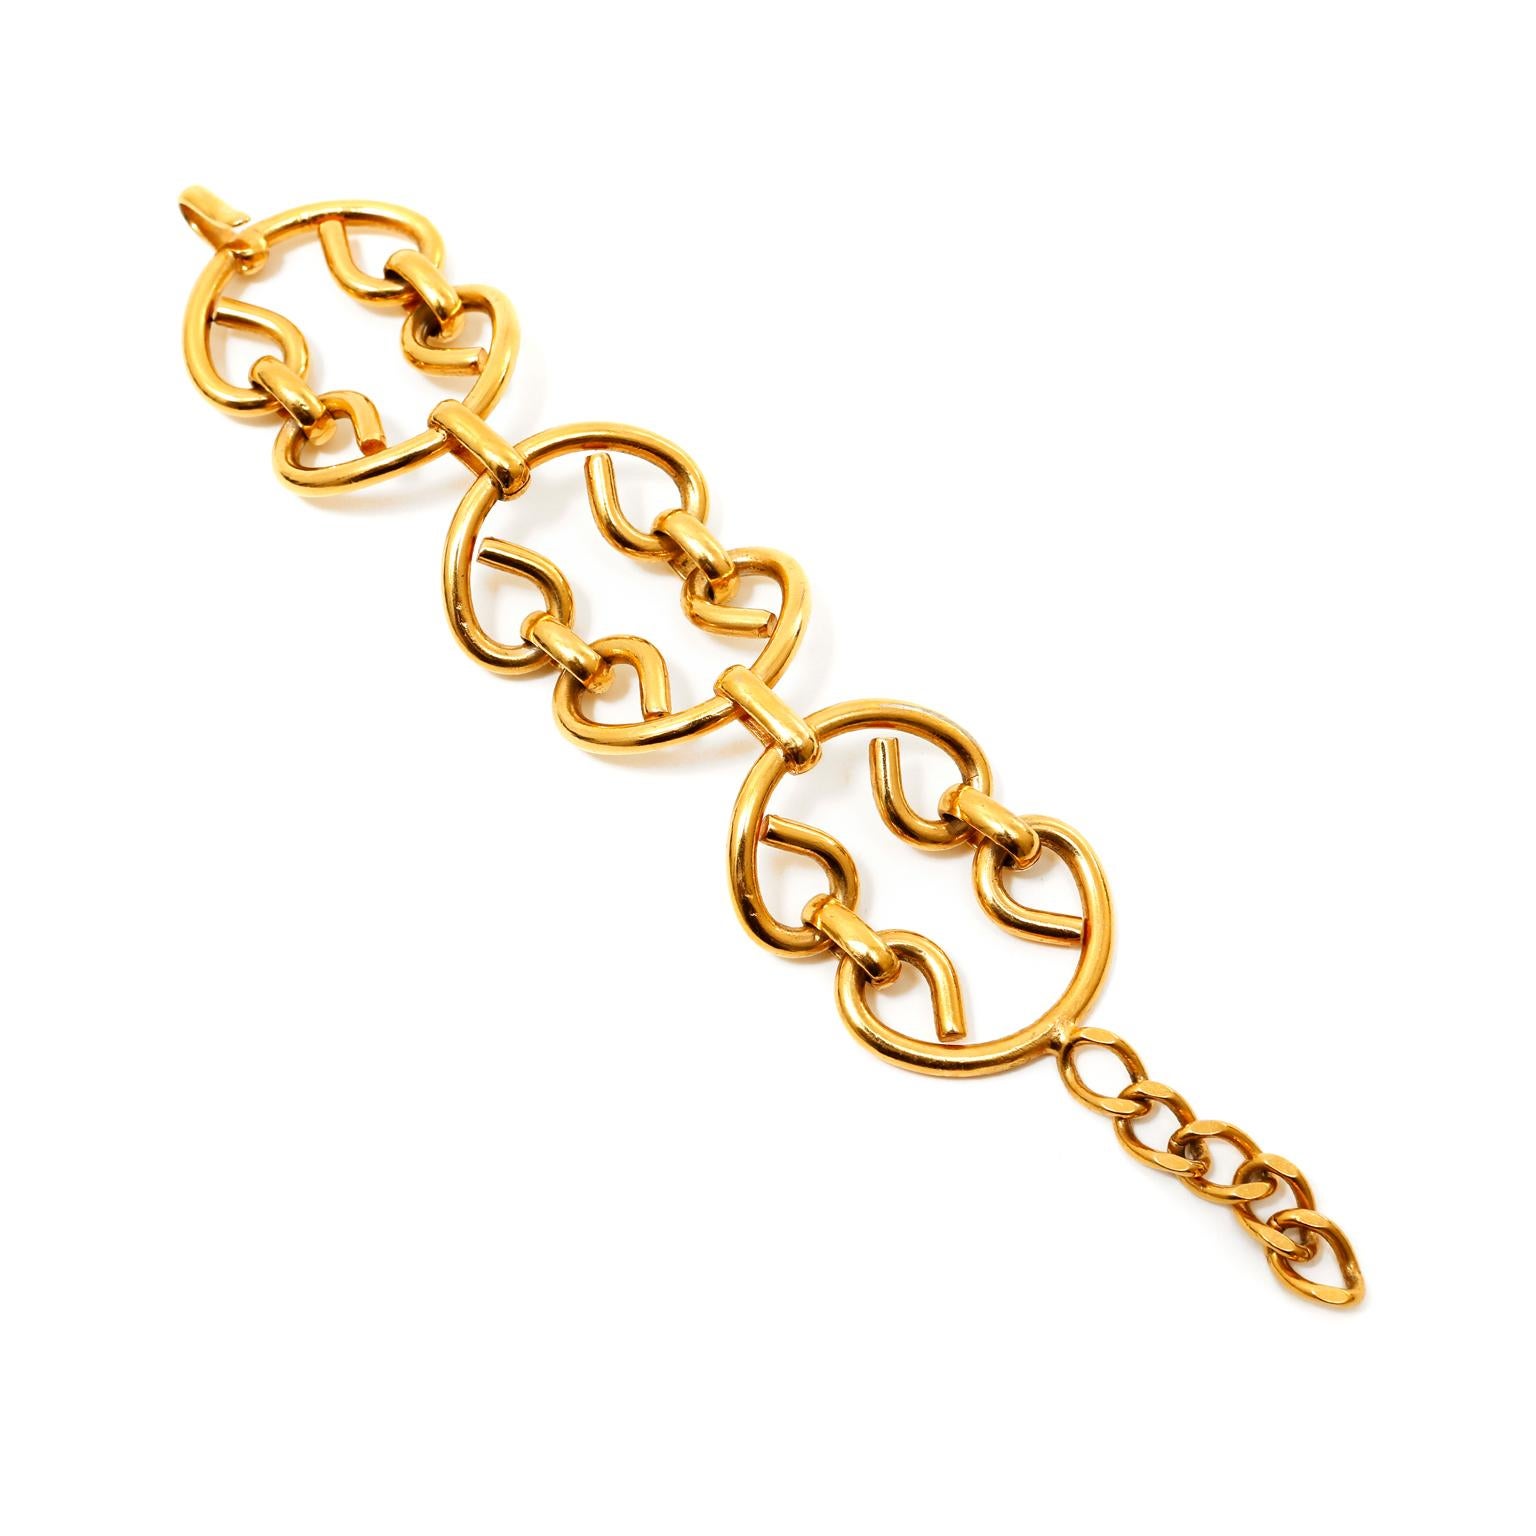 This authentic Chanel Gold Large Link Bracelet is in excellent condition.  24 karat gold plated articulated bracelet.  Approximately eight inches long, one and a half inches wide.
PBF 10760
